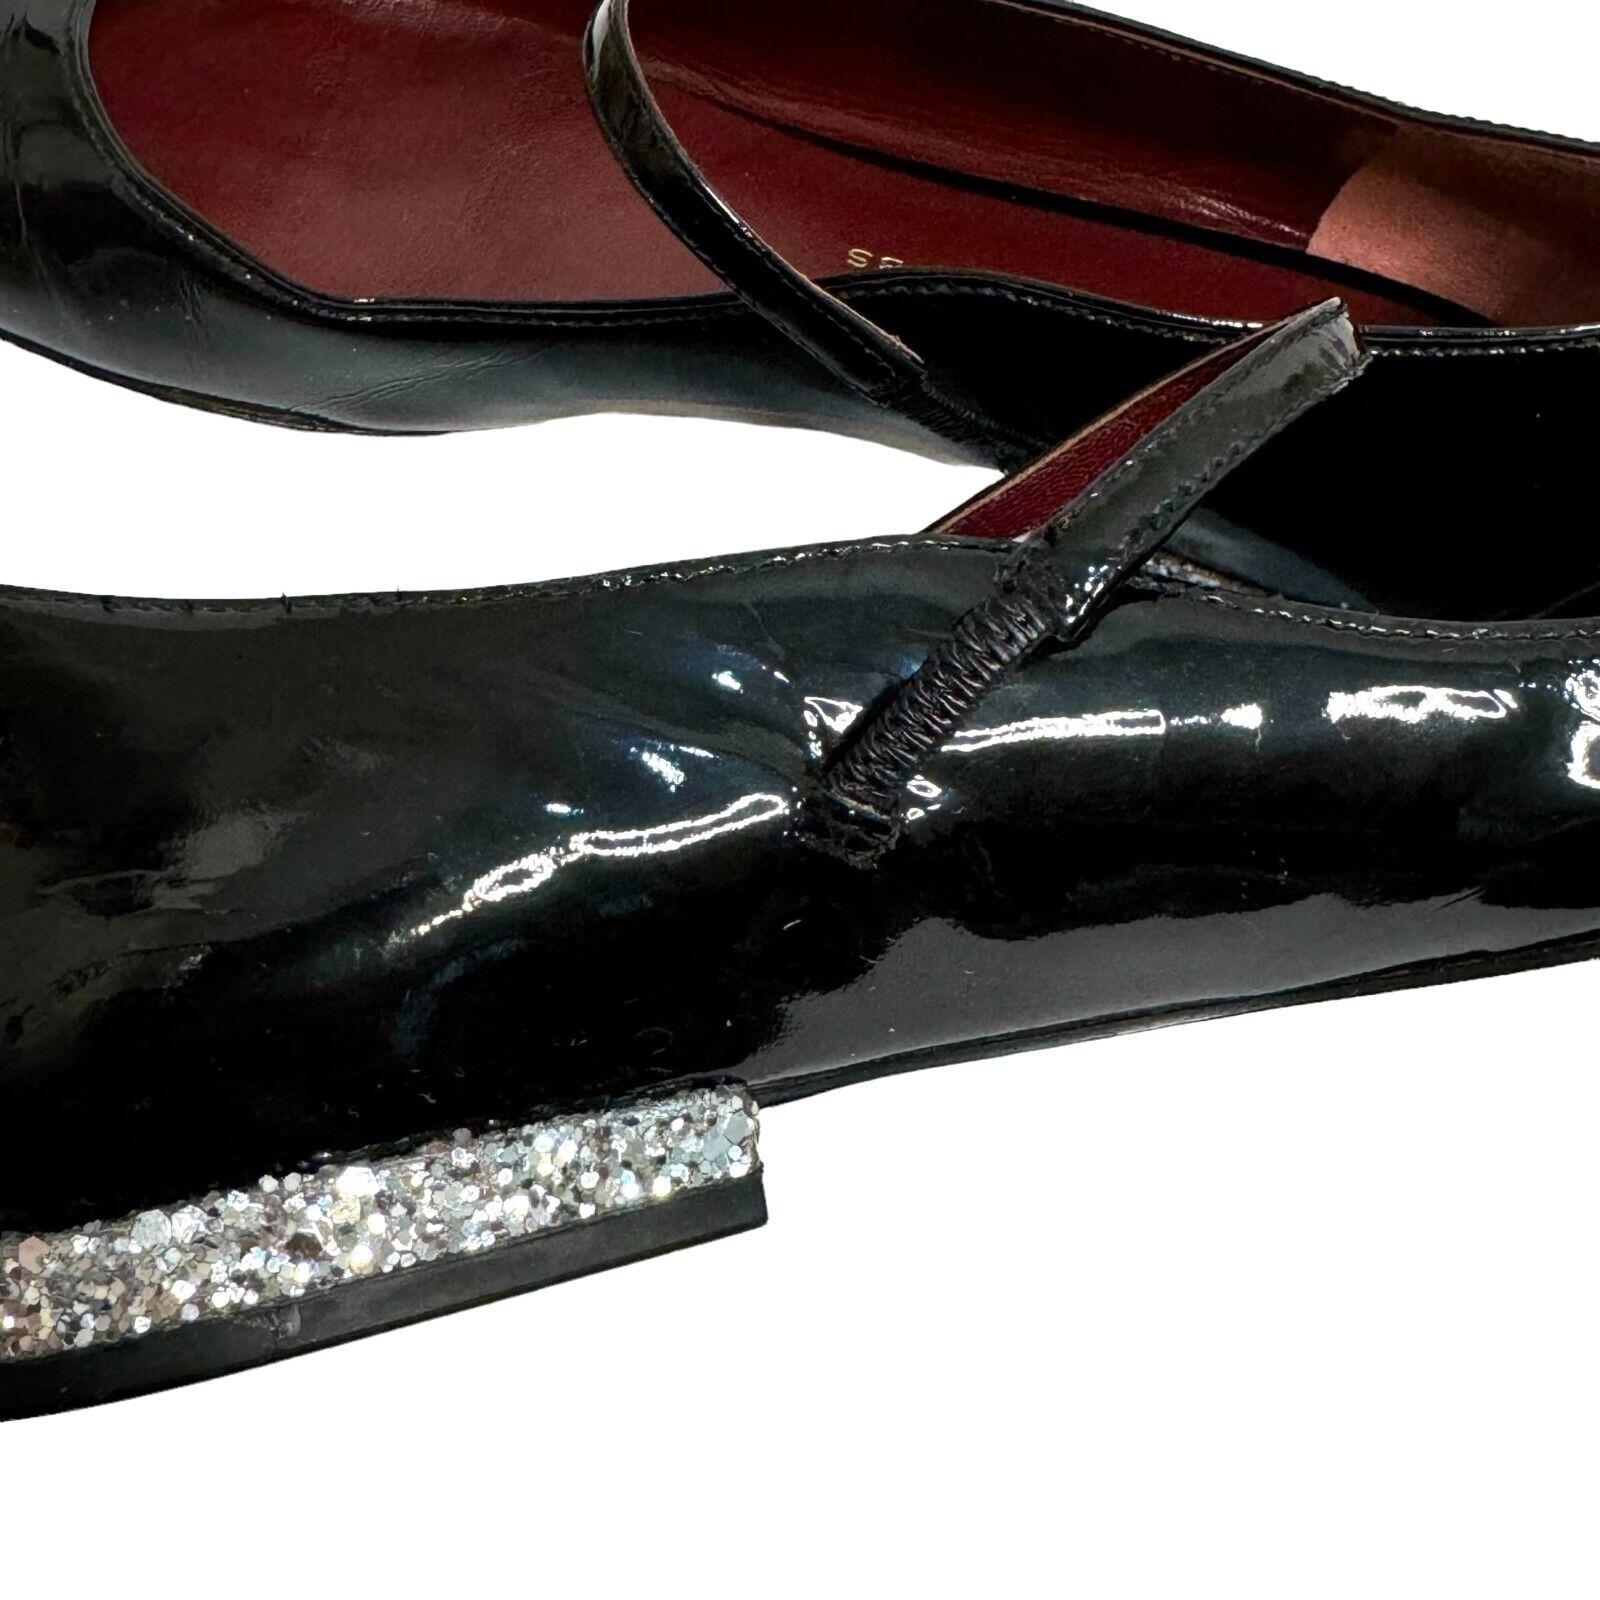 Marc by Marc Jacobs Black Patent Leather Glitter Brooke Mary Jane Flats Size 7.5